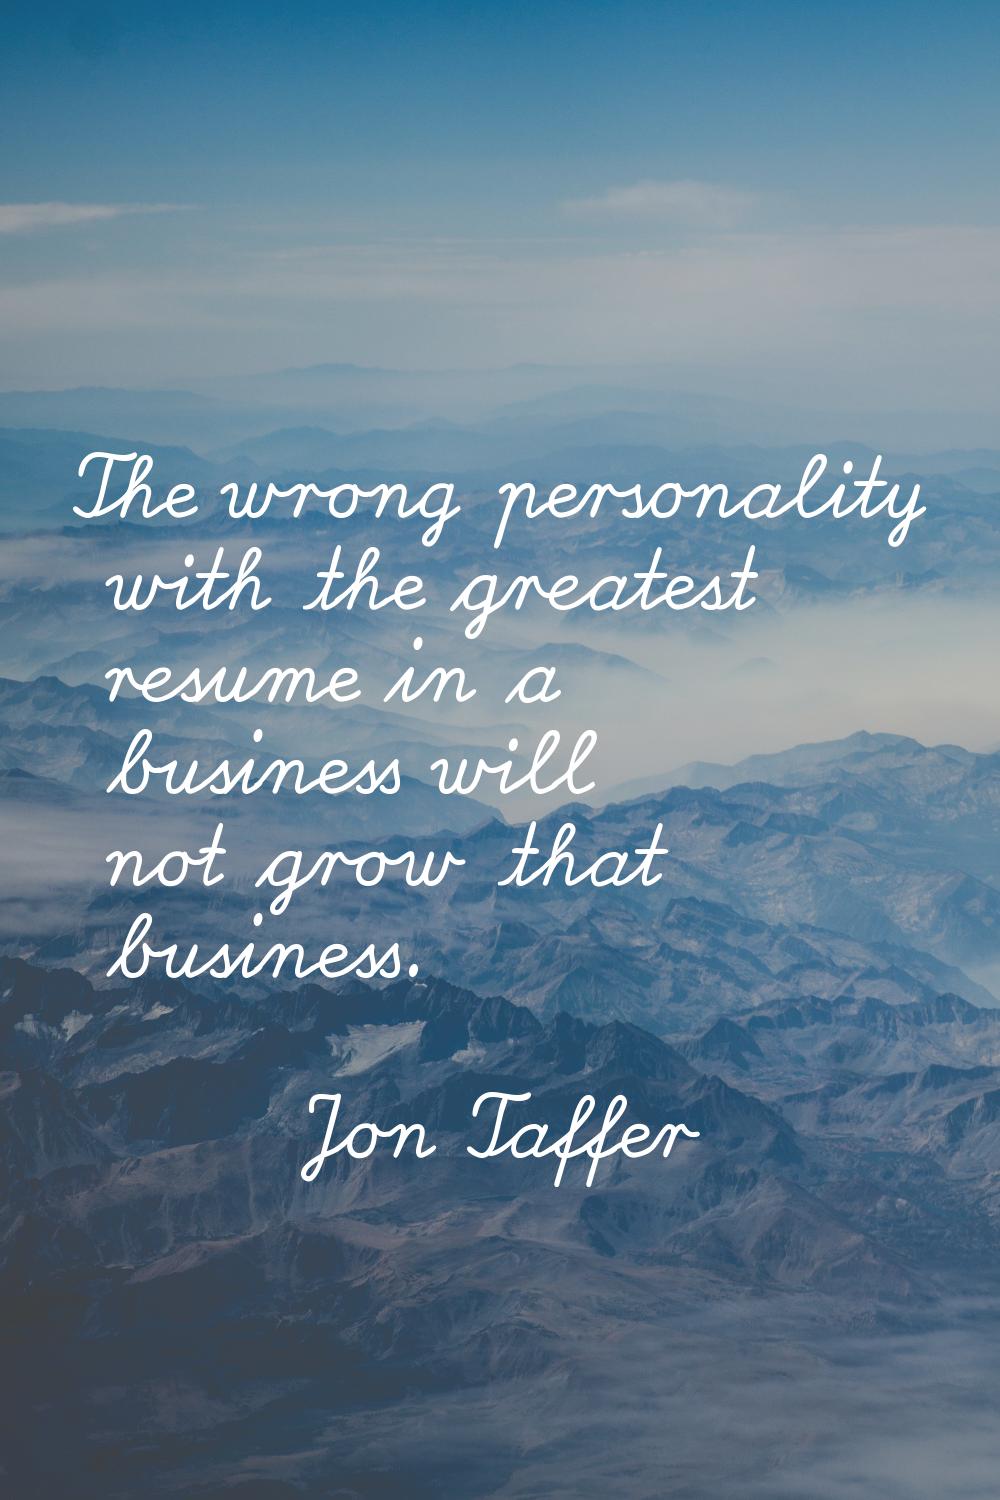 The wrong personality with the greatest resume in a business will not grow that business.